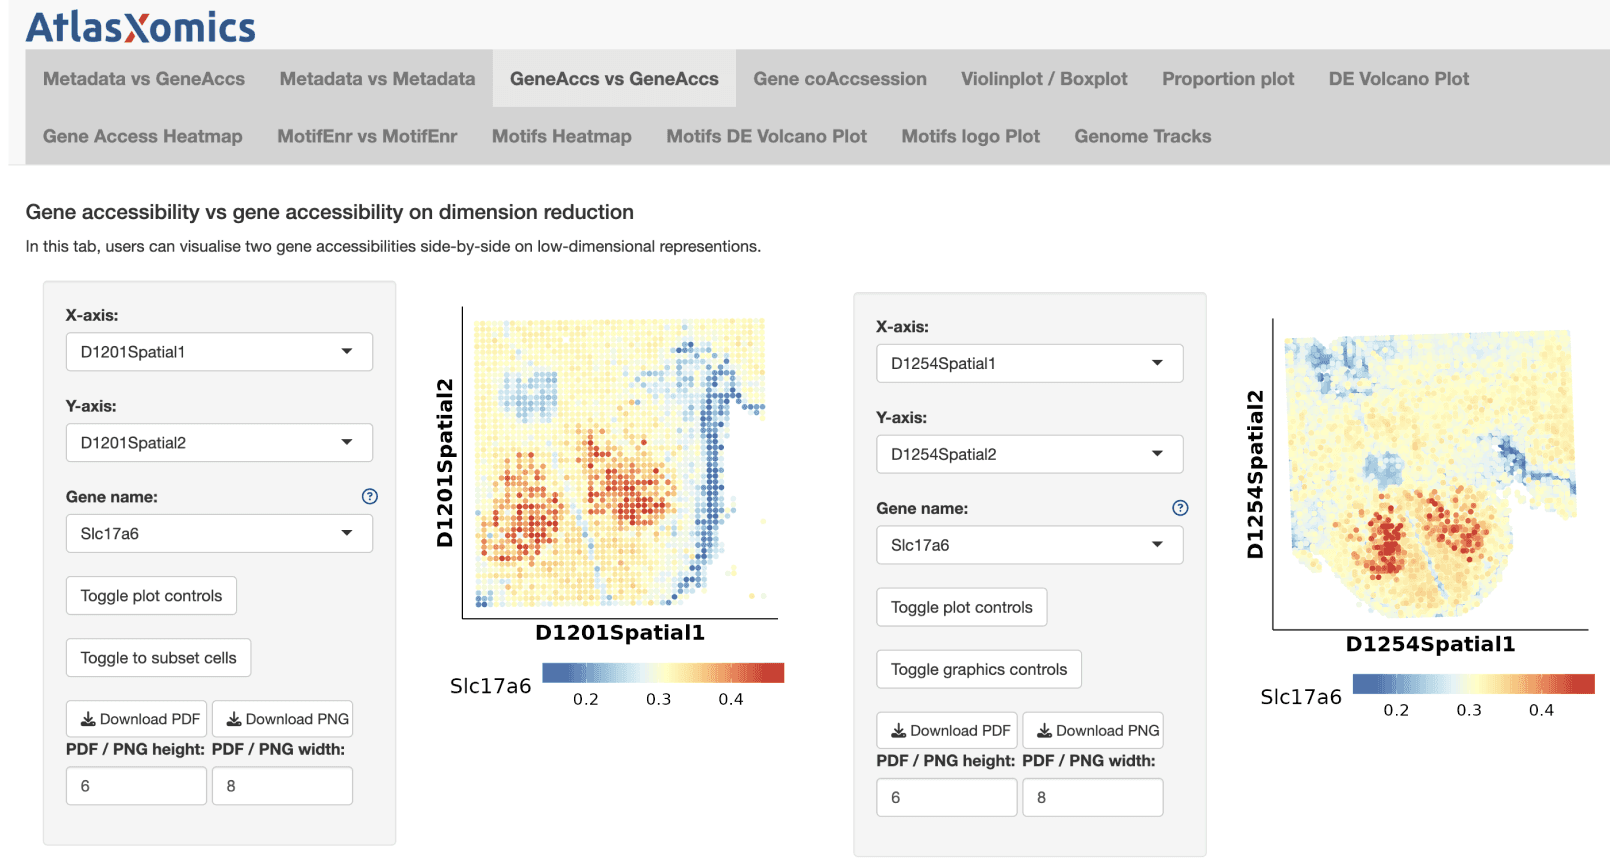 AtlasXomics web interface displaying gene accessibility heatmaps for comparative analysis